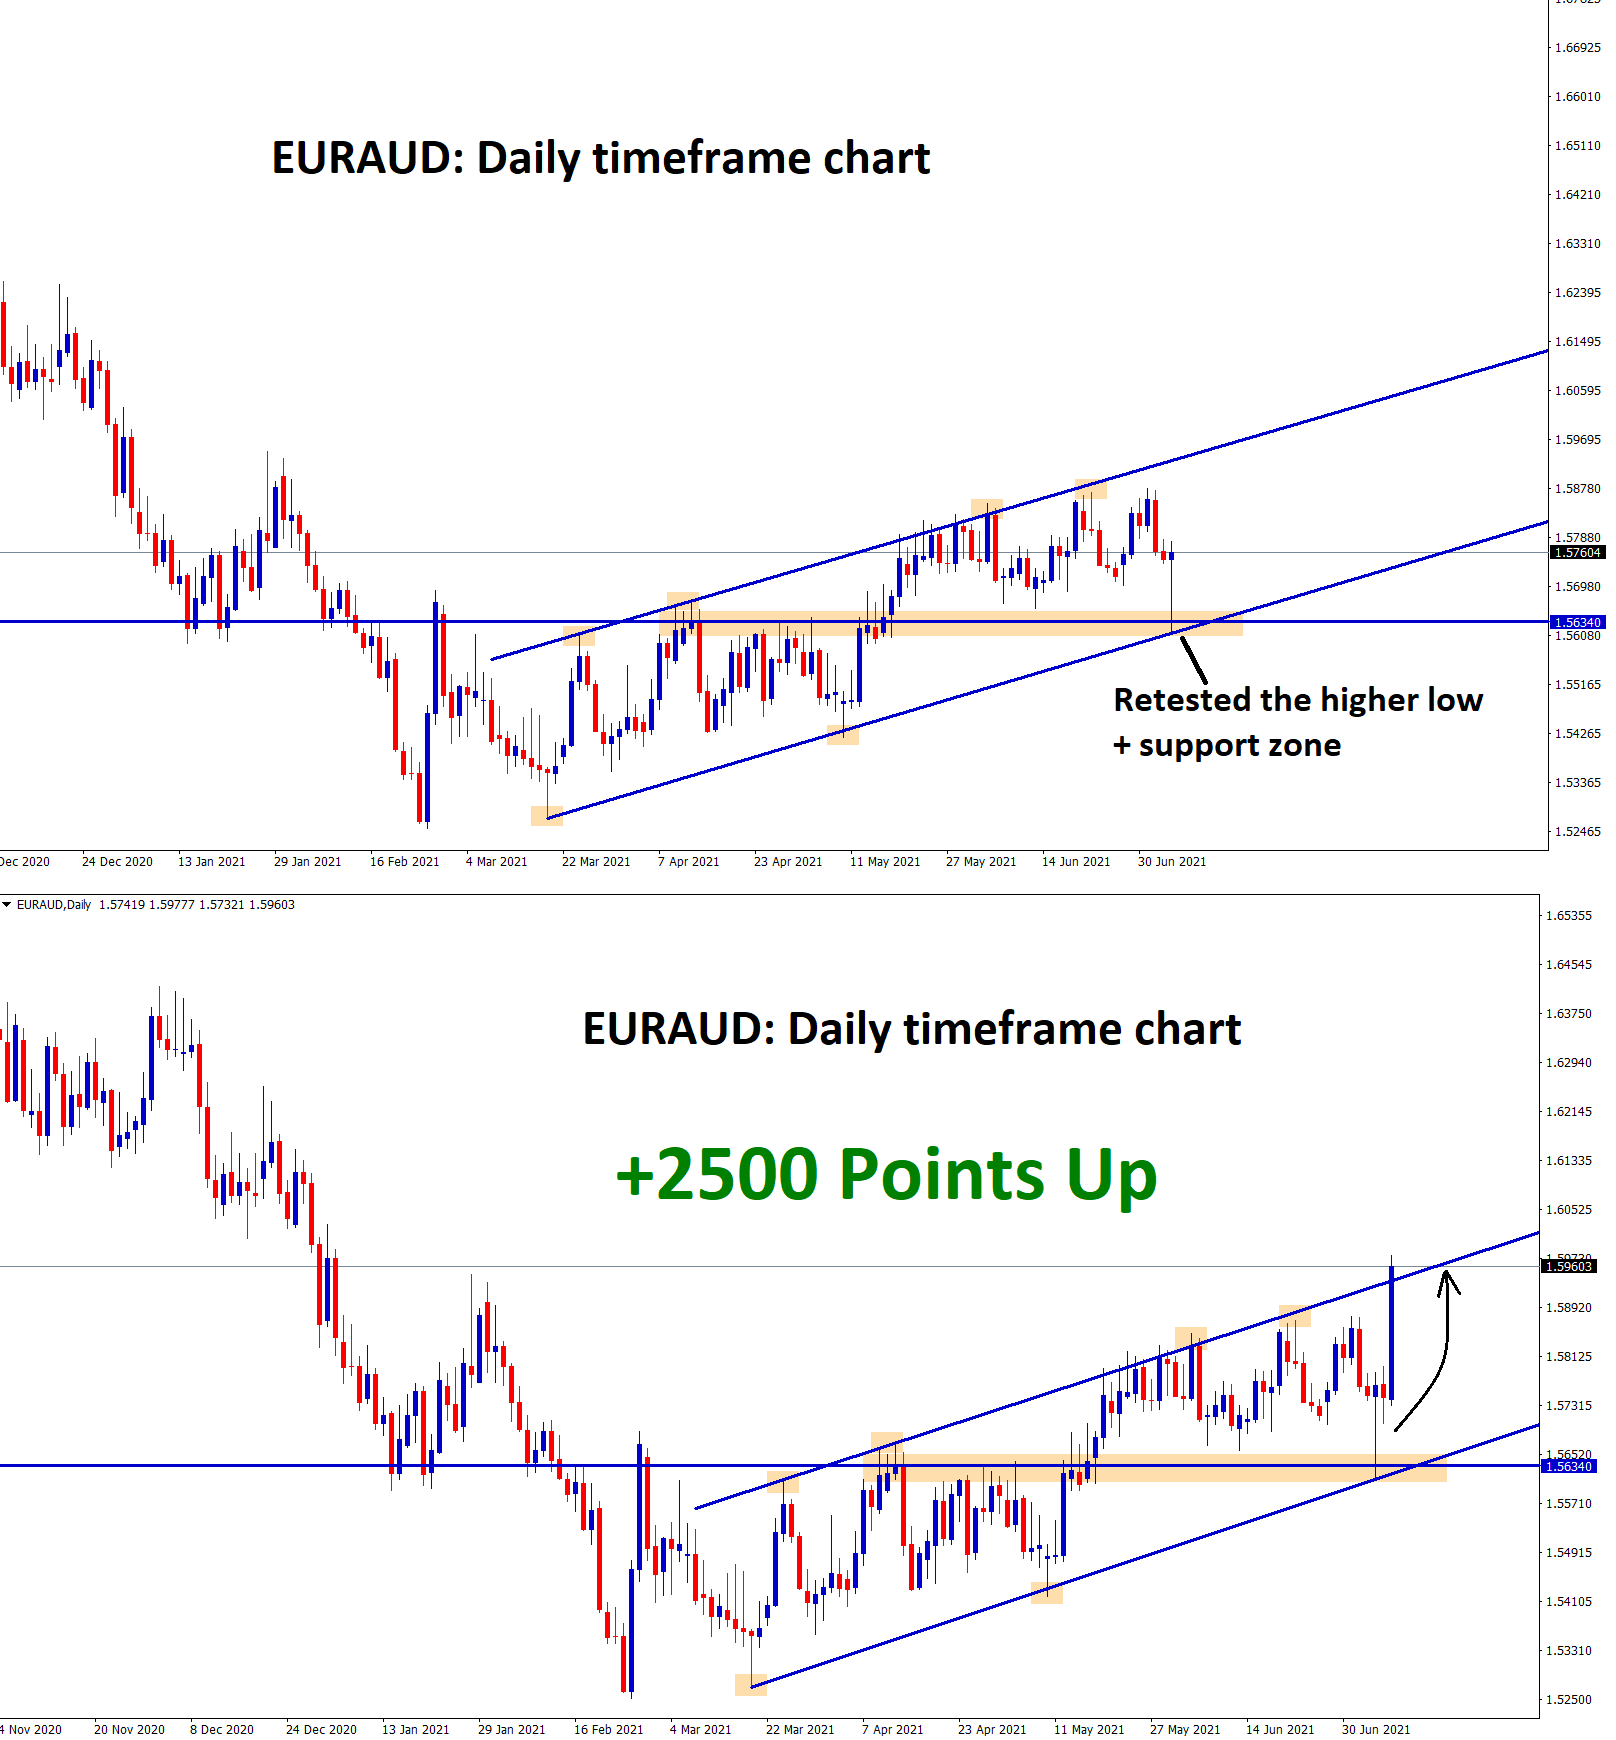 EURAUD retested the higher low of trend and support zone 1